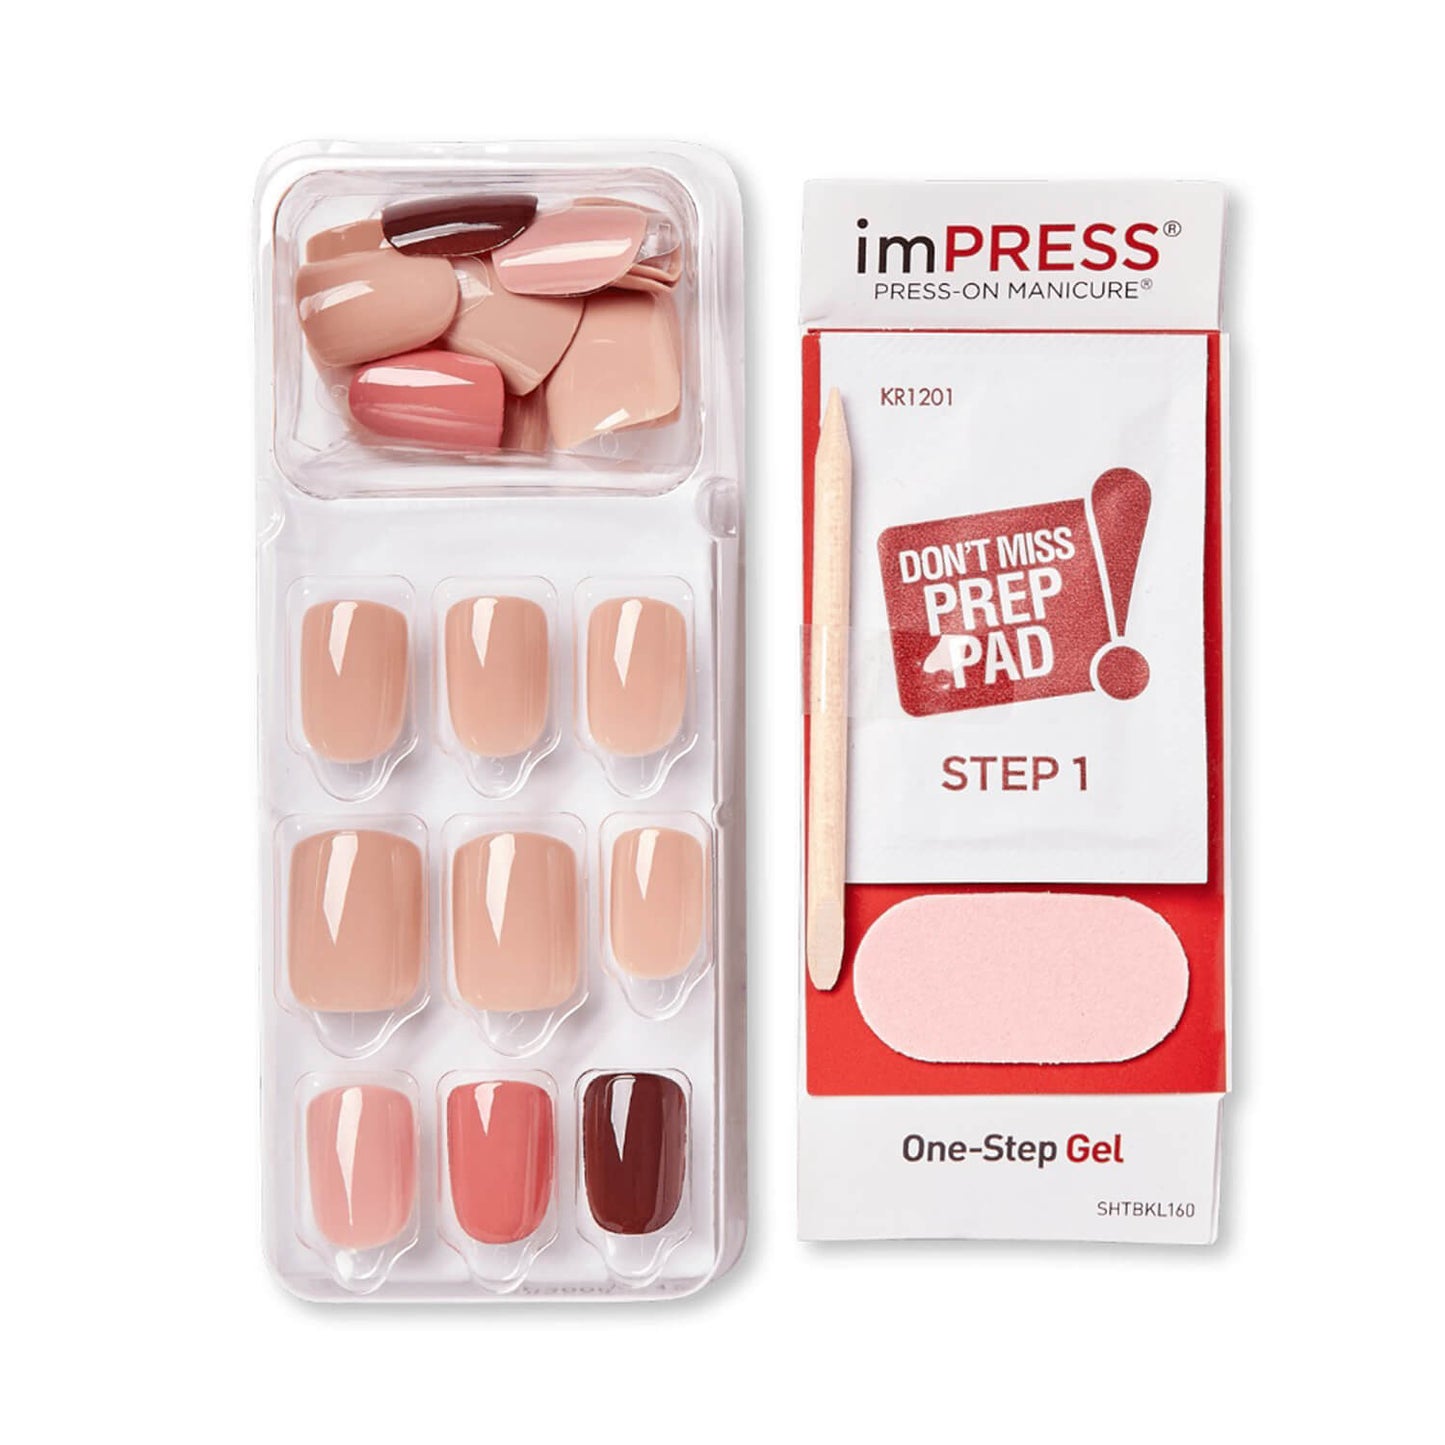 Press-on nails available at heygil.pk for delivery in Pakistan. 